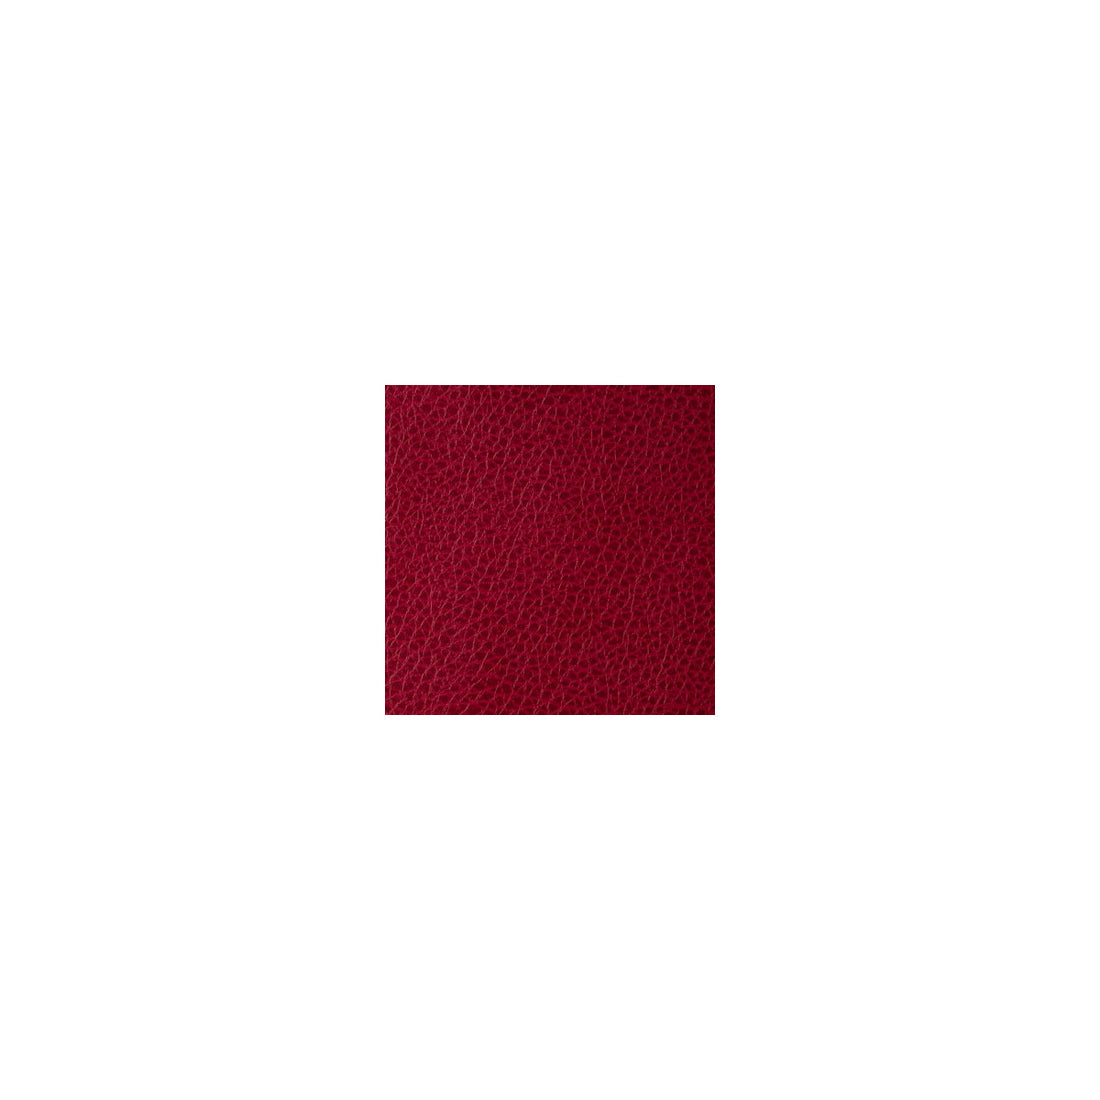 Foothill fabric in sangria color - pattern FOOTHILL.910.0 - by Kravet Contract in the Sta-Kleen collection